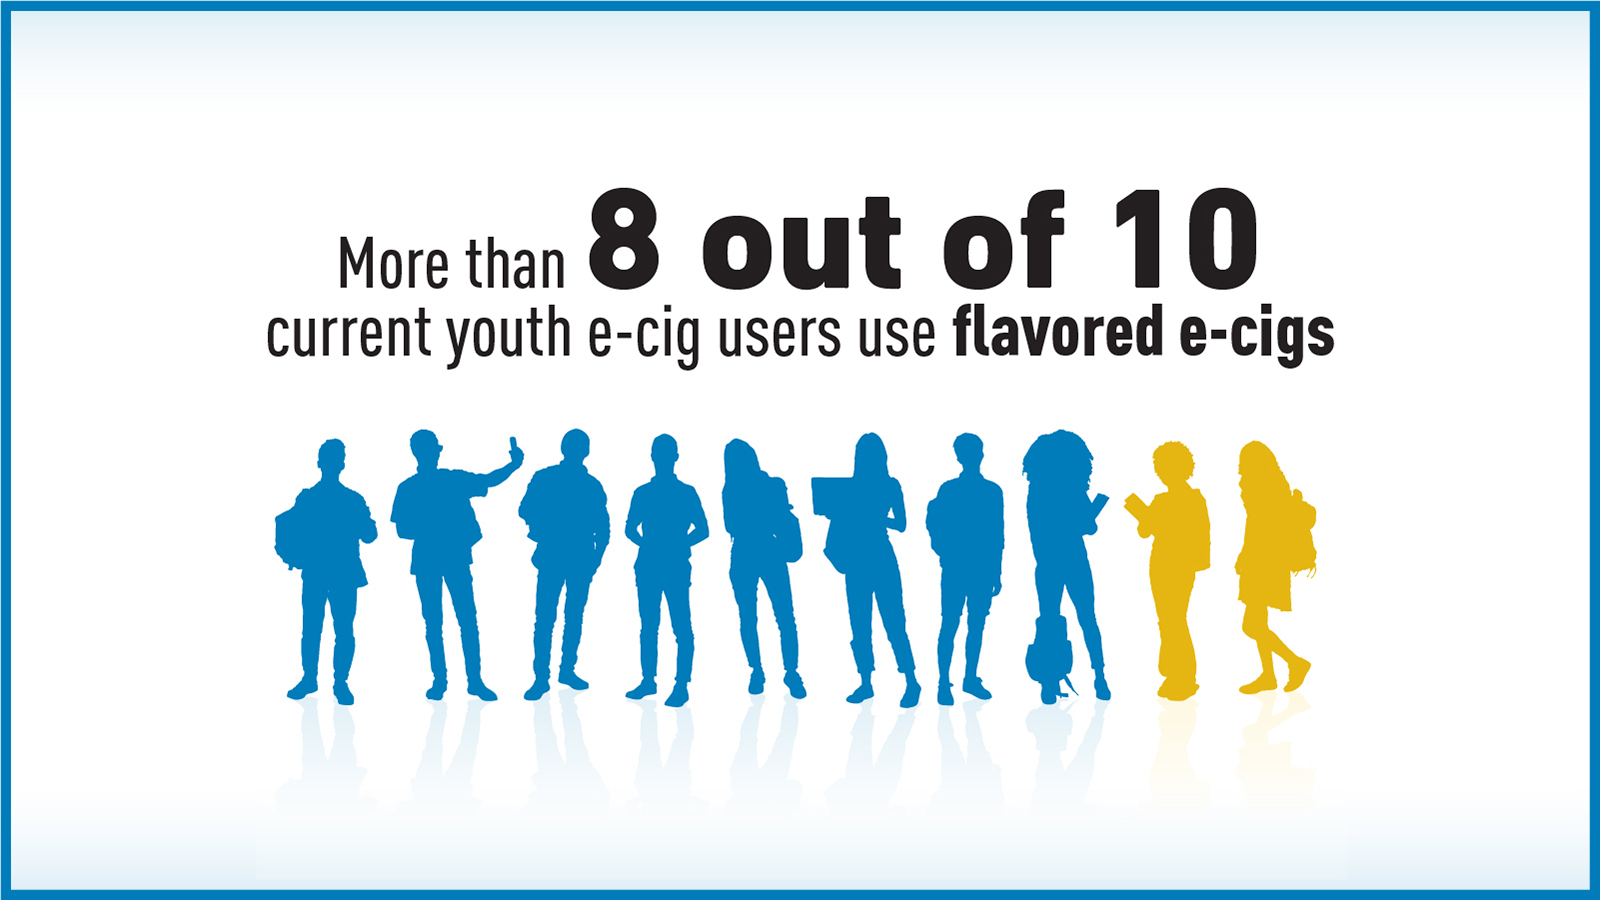 more than 8 out of 10 current youth e-cig users use flavored e-cigs